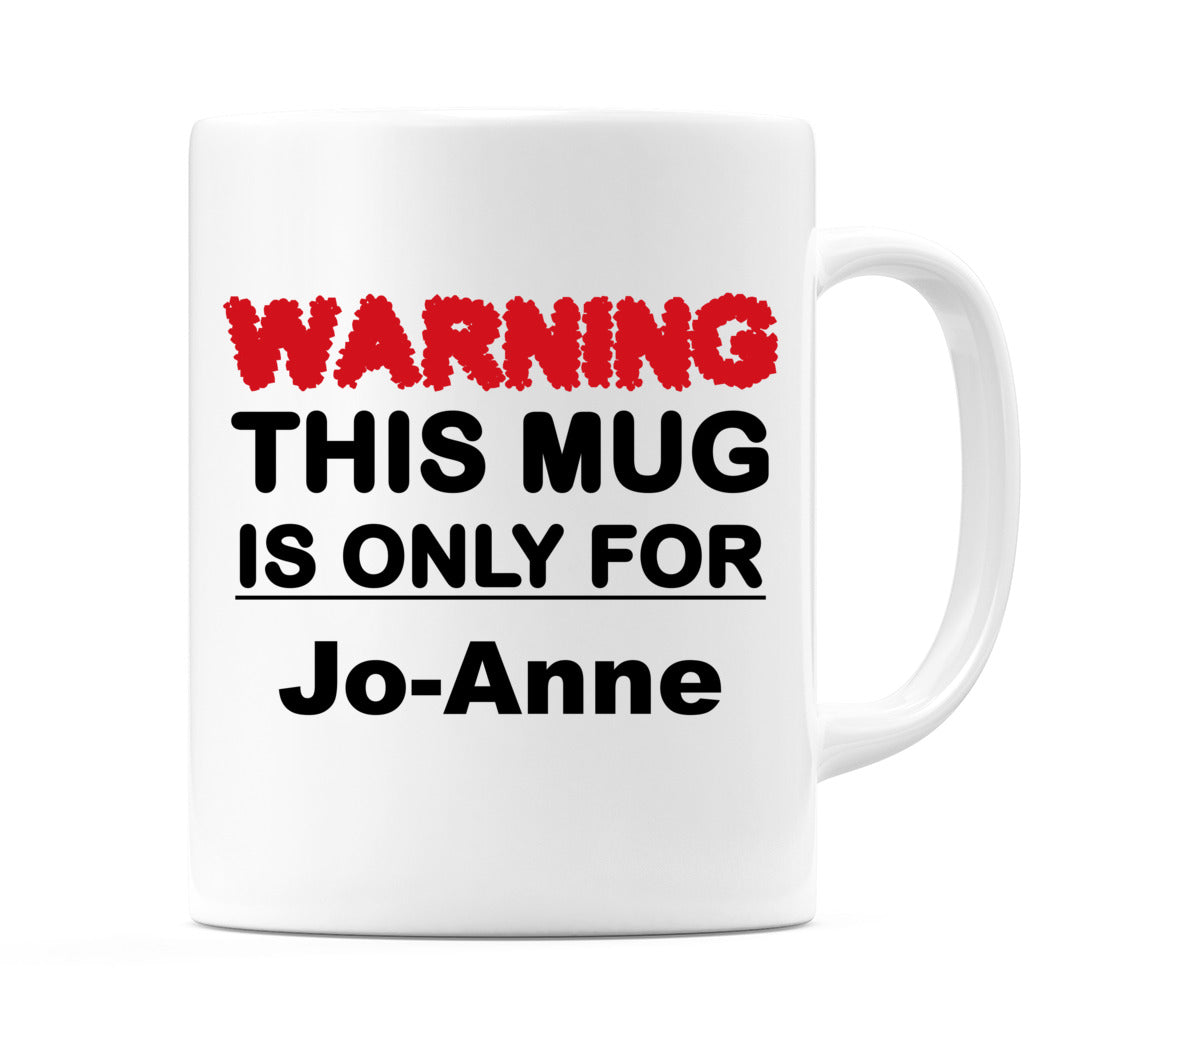 Warning This Mug is ONLY for Jo-Anne Mug